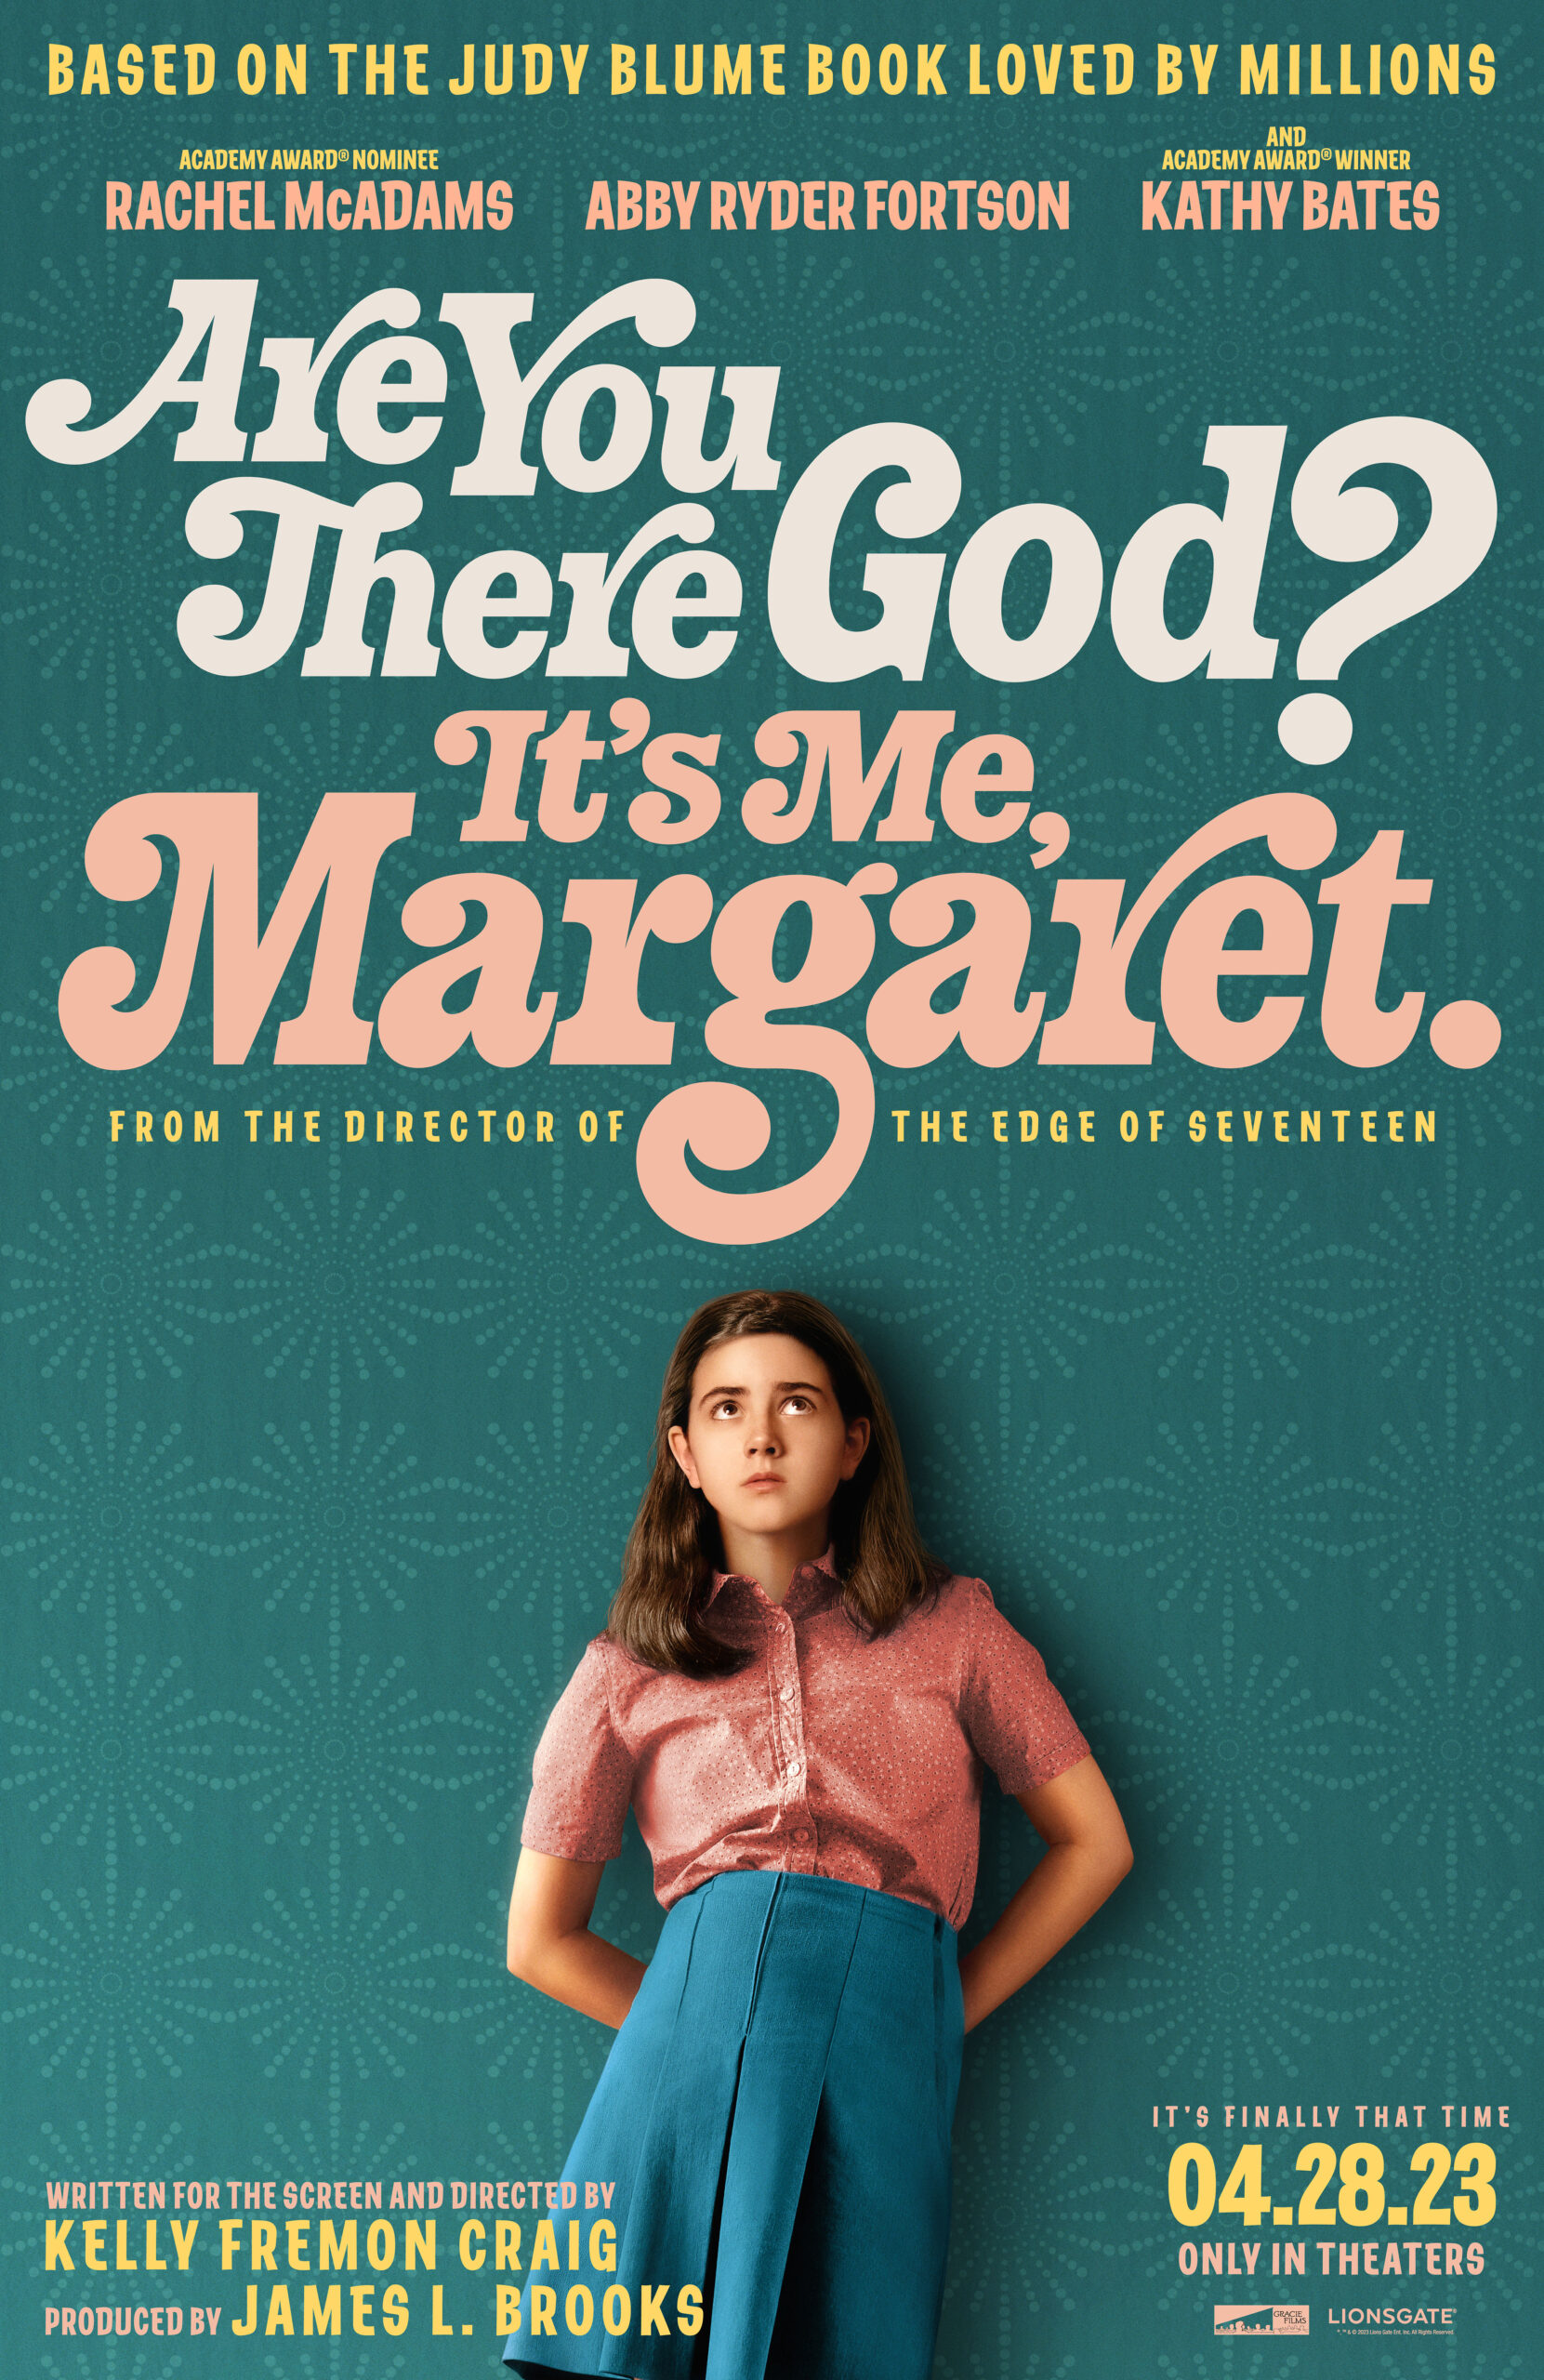 ARE YOU THERE GOD IT’S ME, MARGARET Movie Poster